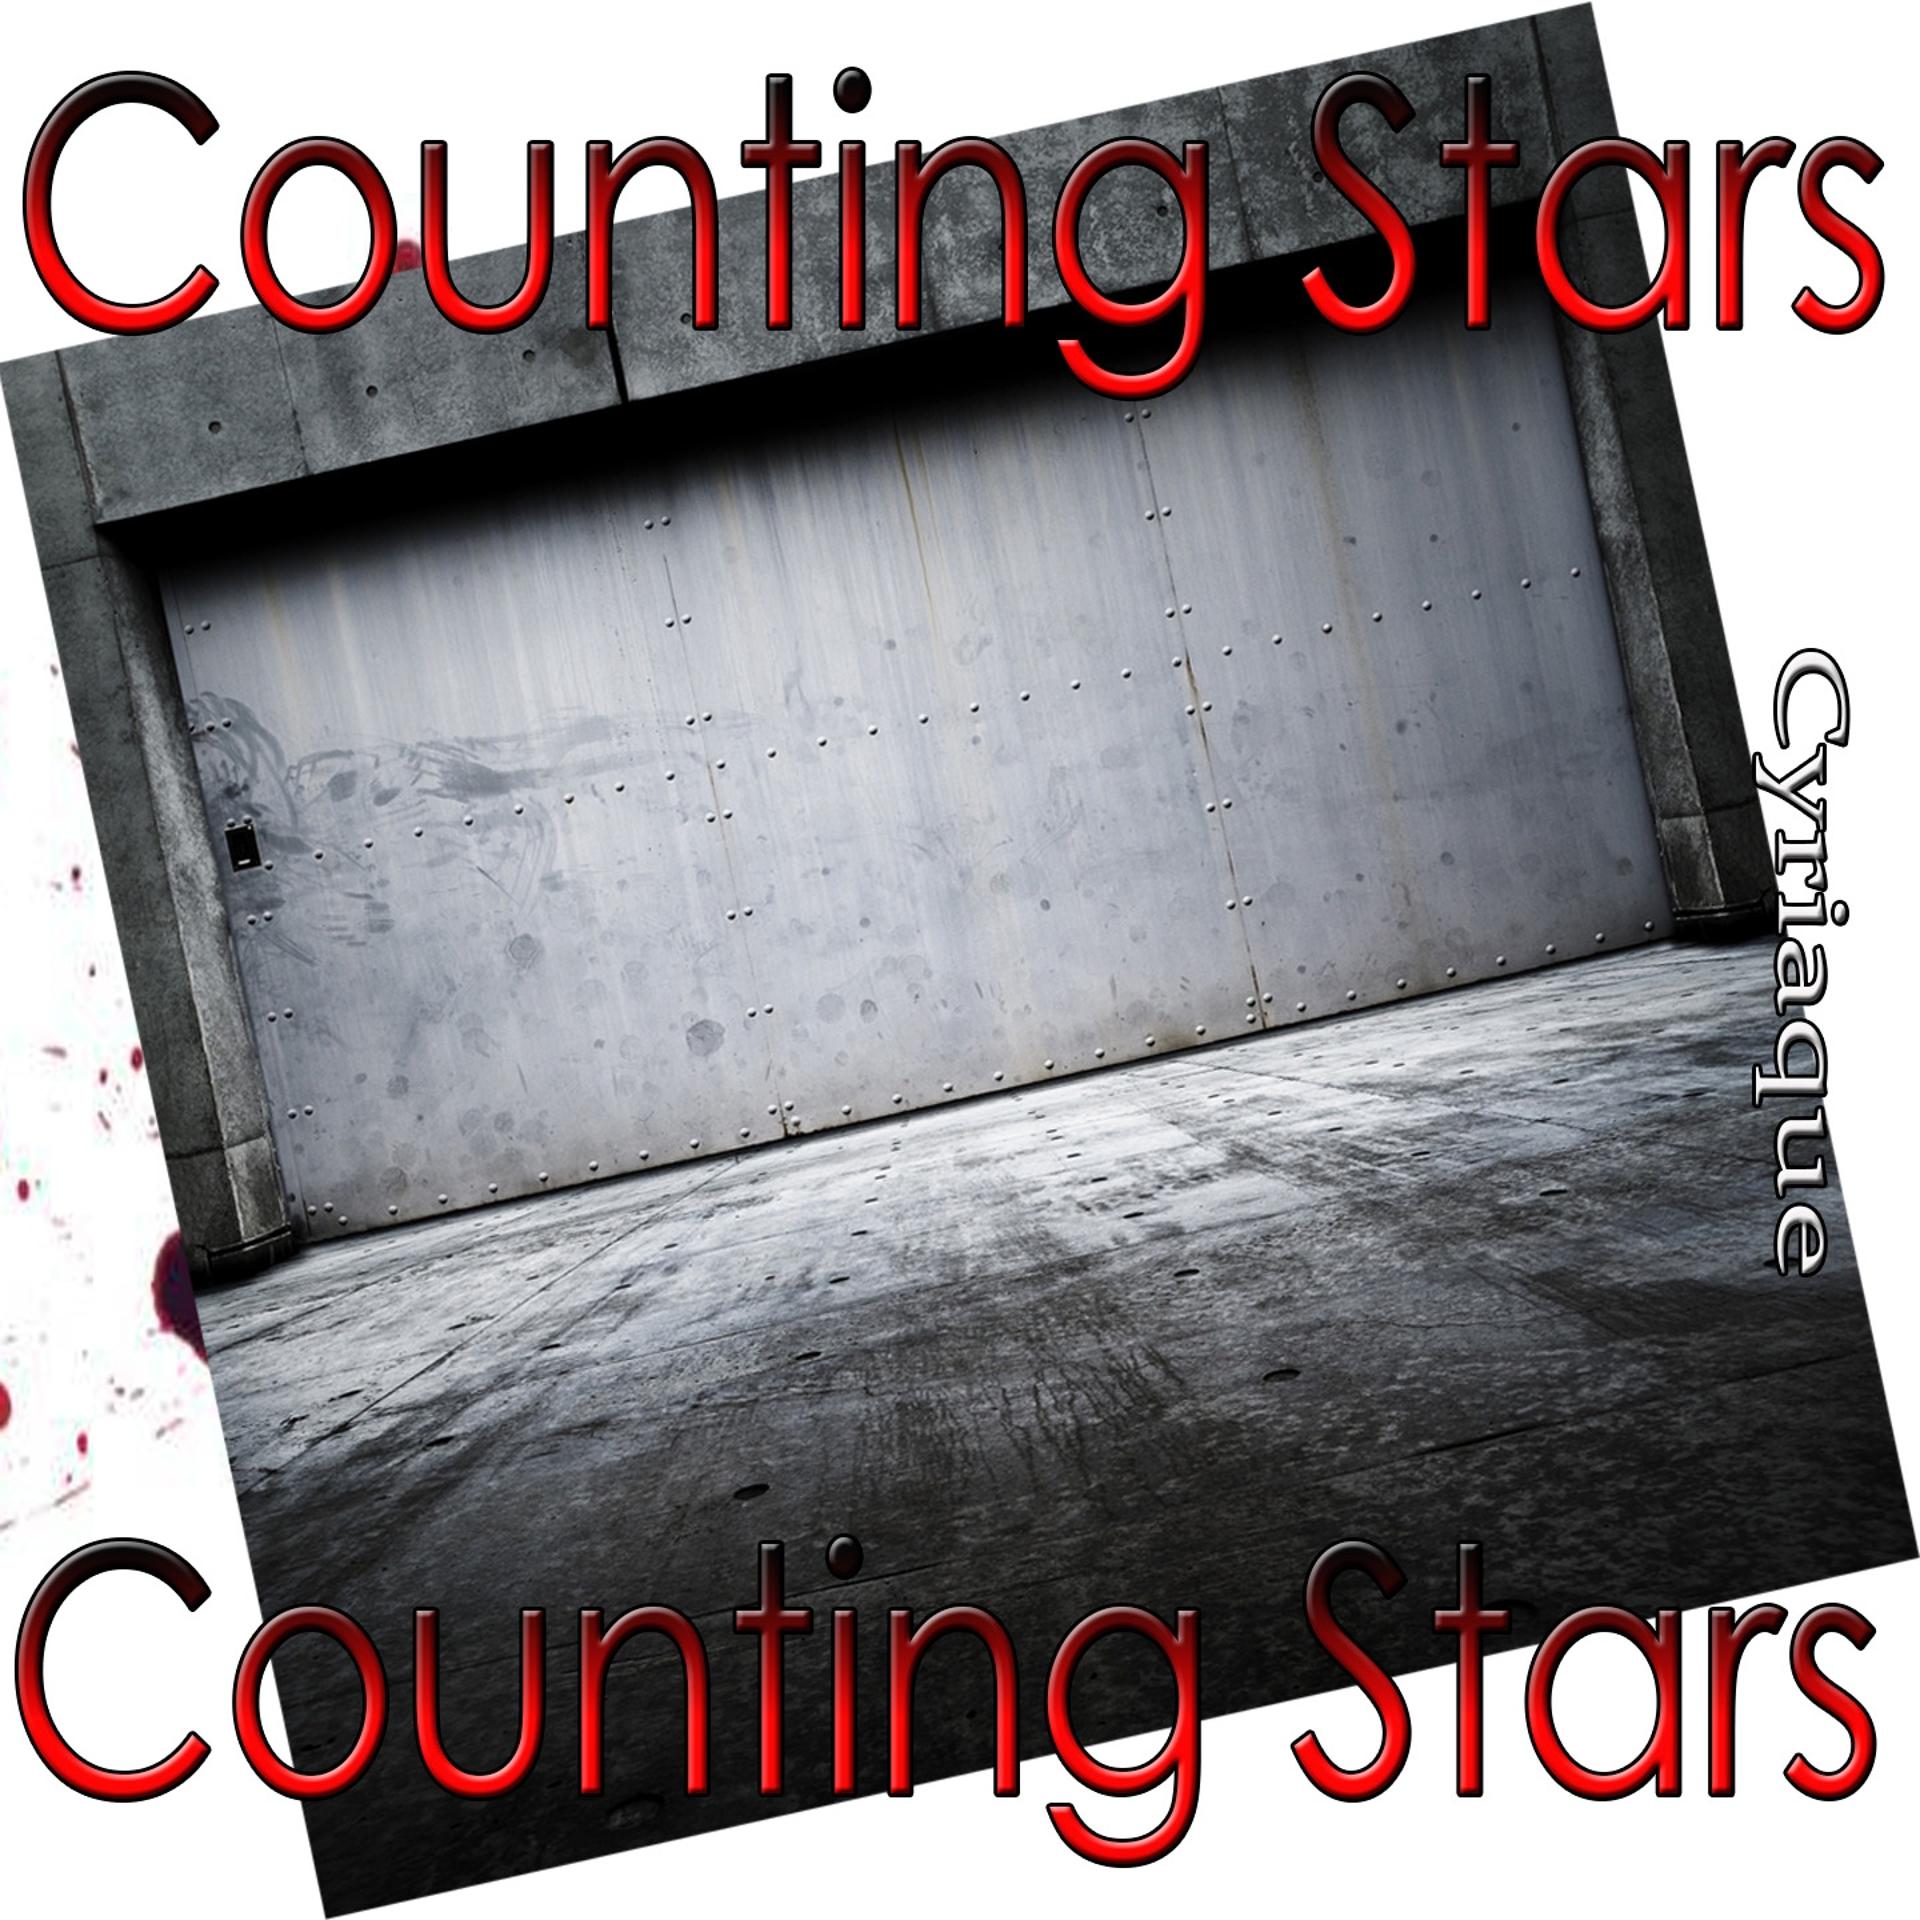 Постер альбома Counting Stars: Tribute to One Republic